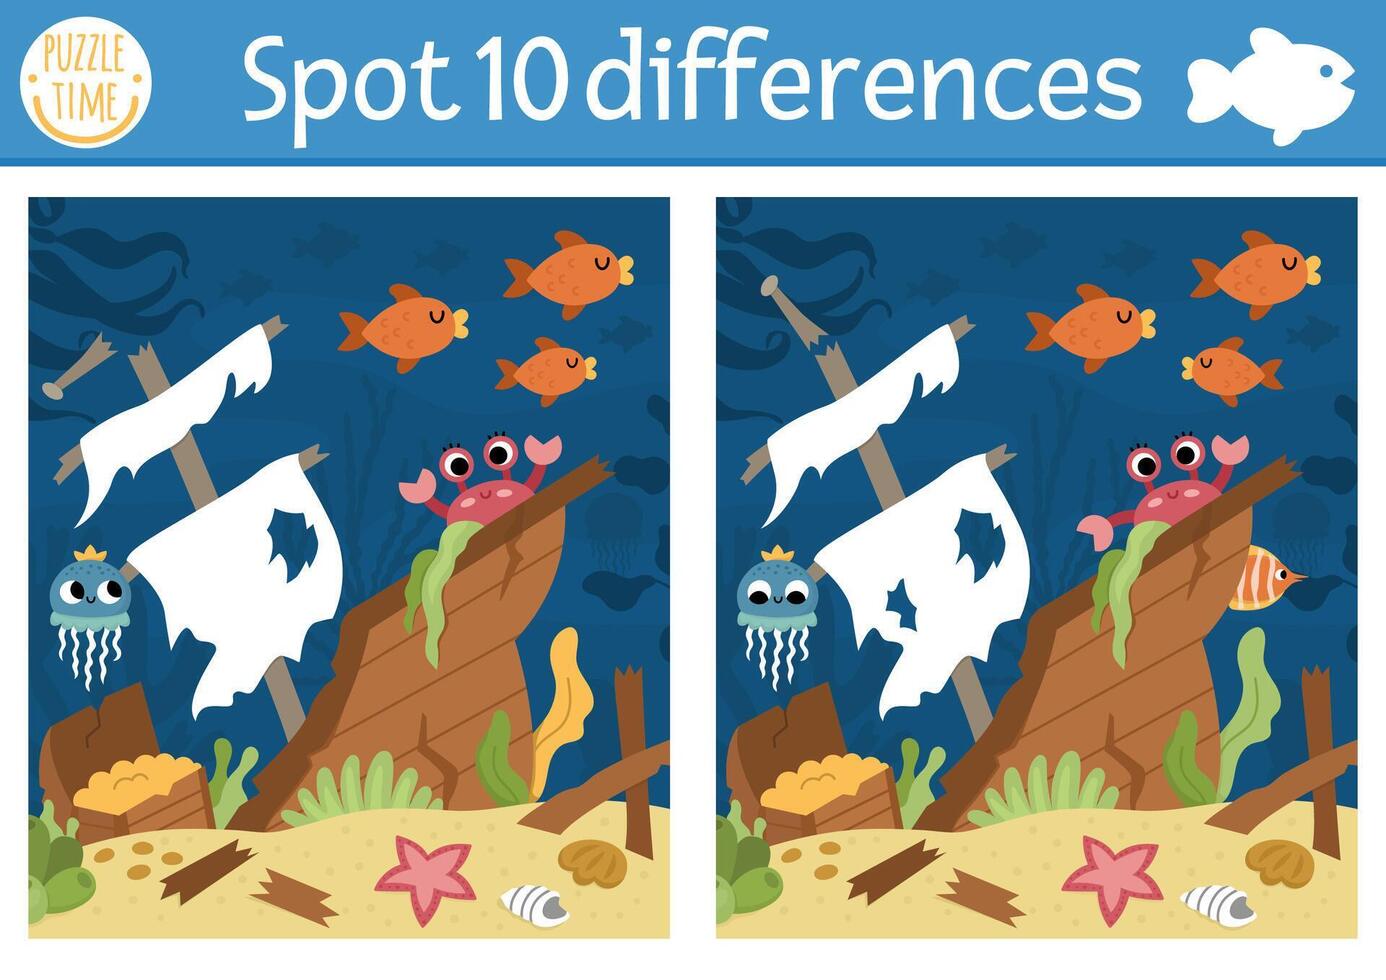 Find differences game for children. Under the sea educational activity with wrecked ship scene. Ocean life puzzle for kids with water animal character. Underwater printable worksheet or page vector